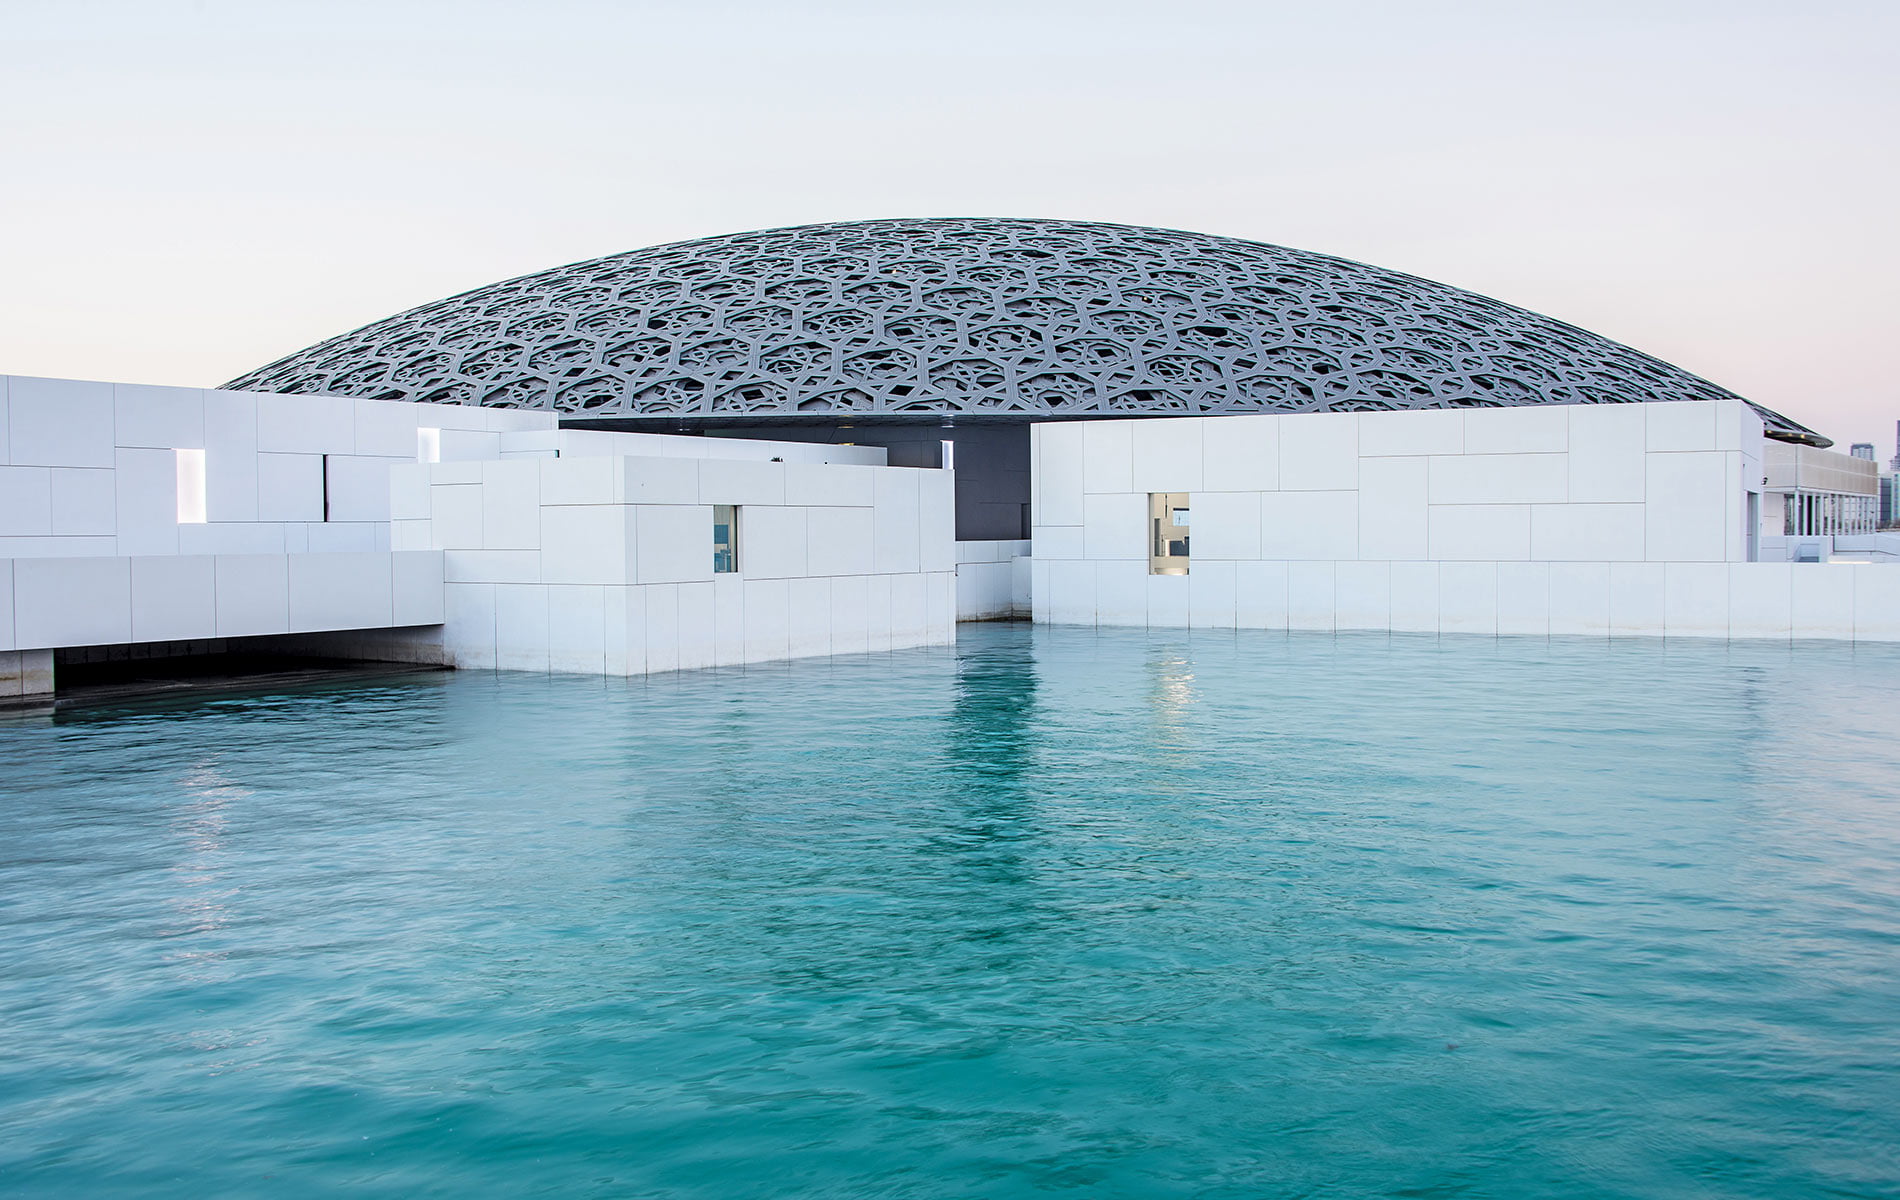 An exterior view of Louvre Abu Dhabi. The museum is completely surrounded by water and is only reachable by boat. | Photo by wangbin6007 / Shutterstock